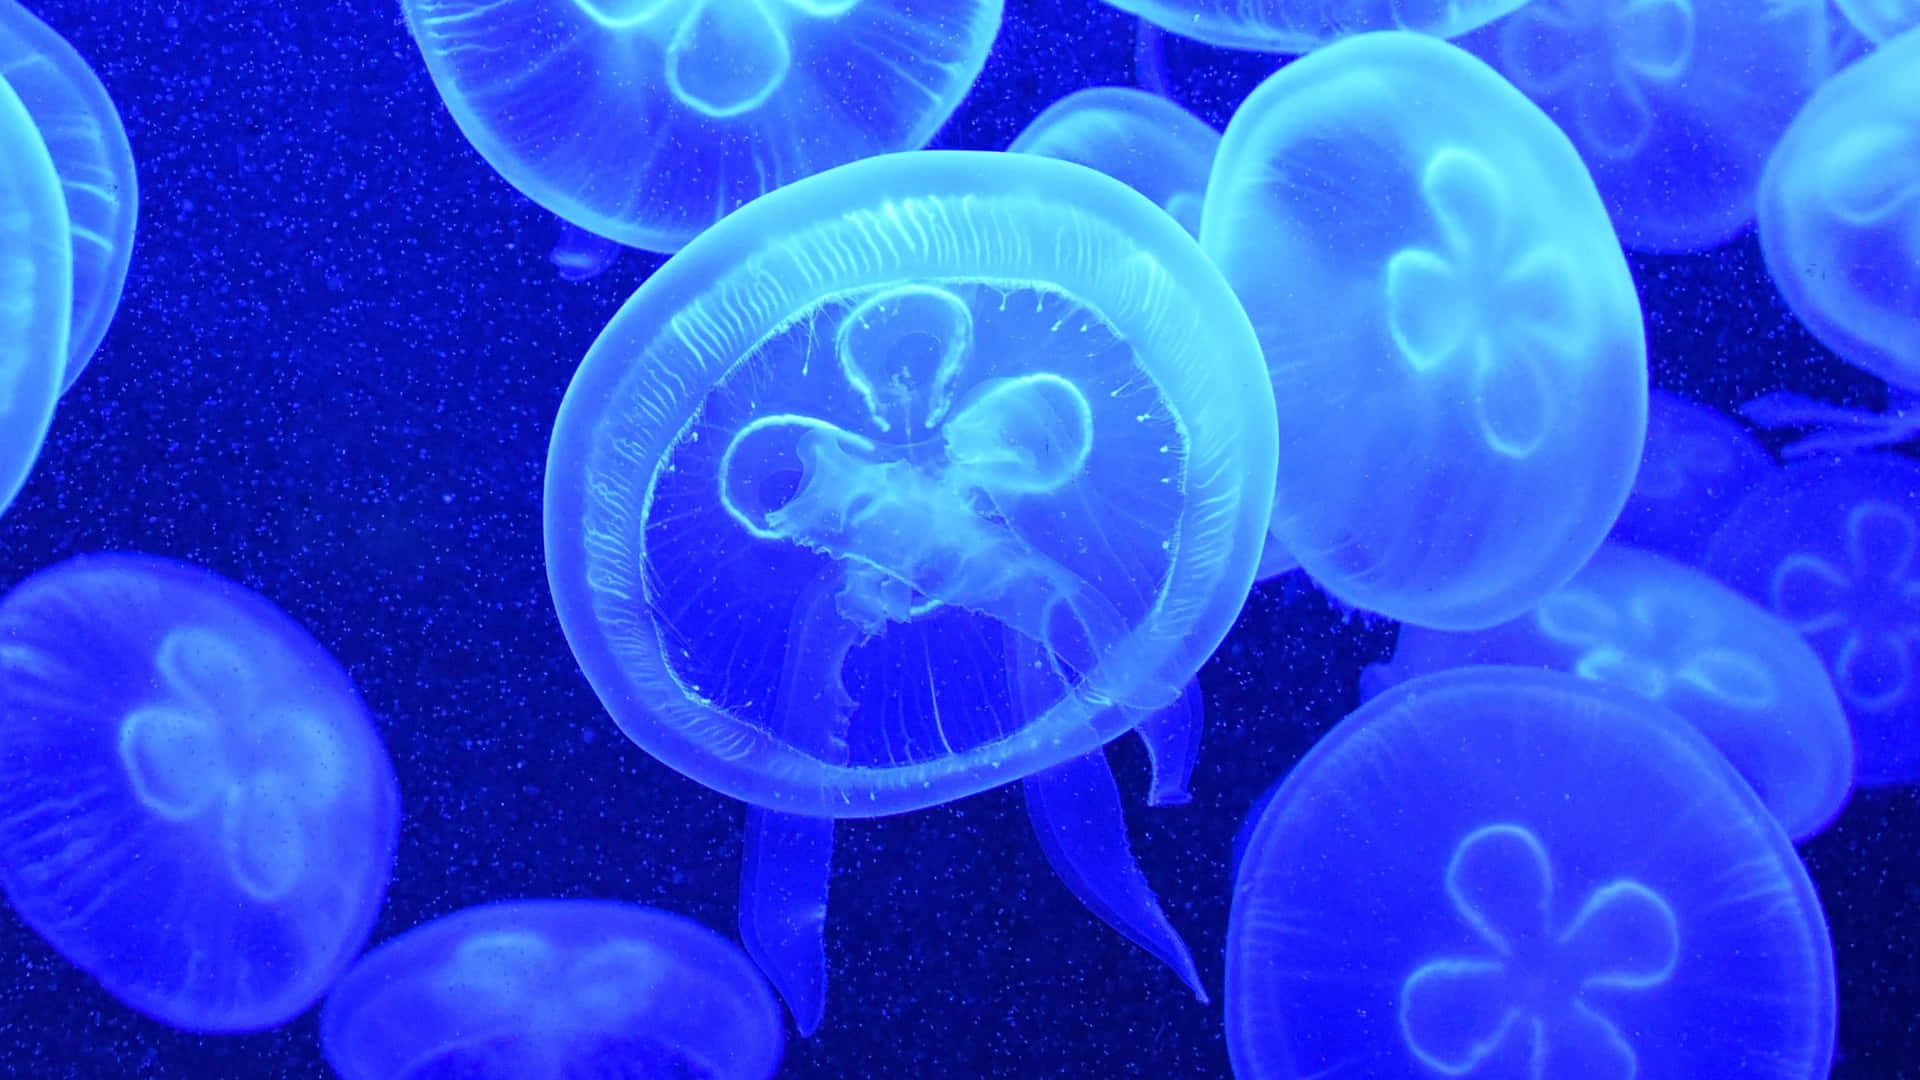 Enjoy The Ethereal Beauty Of The 4k Jellyfish Background